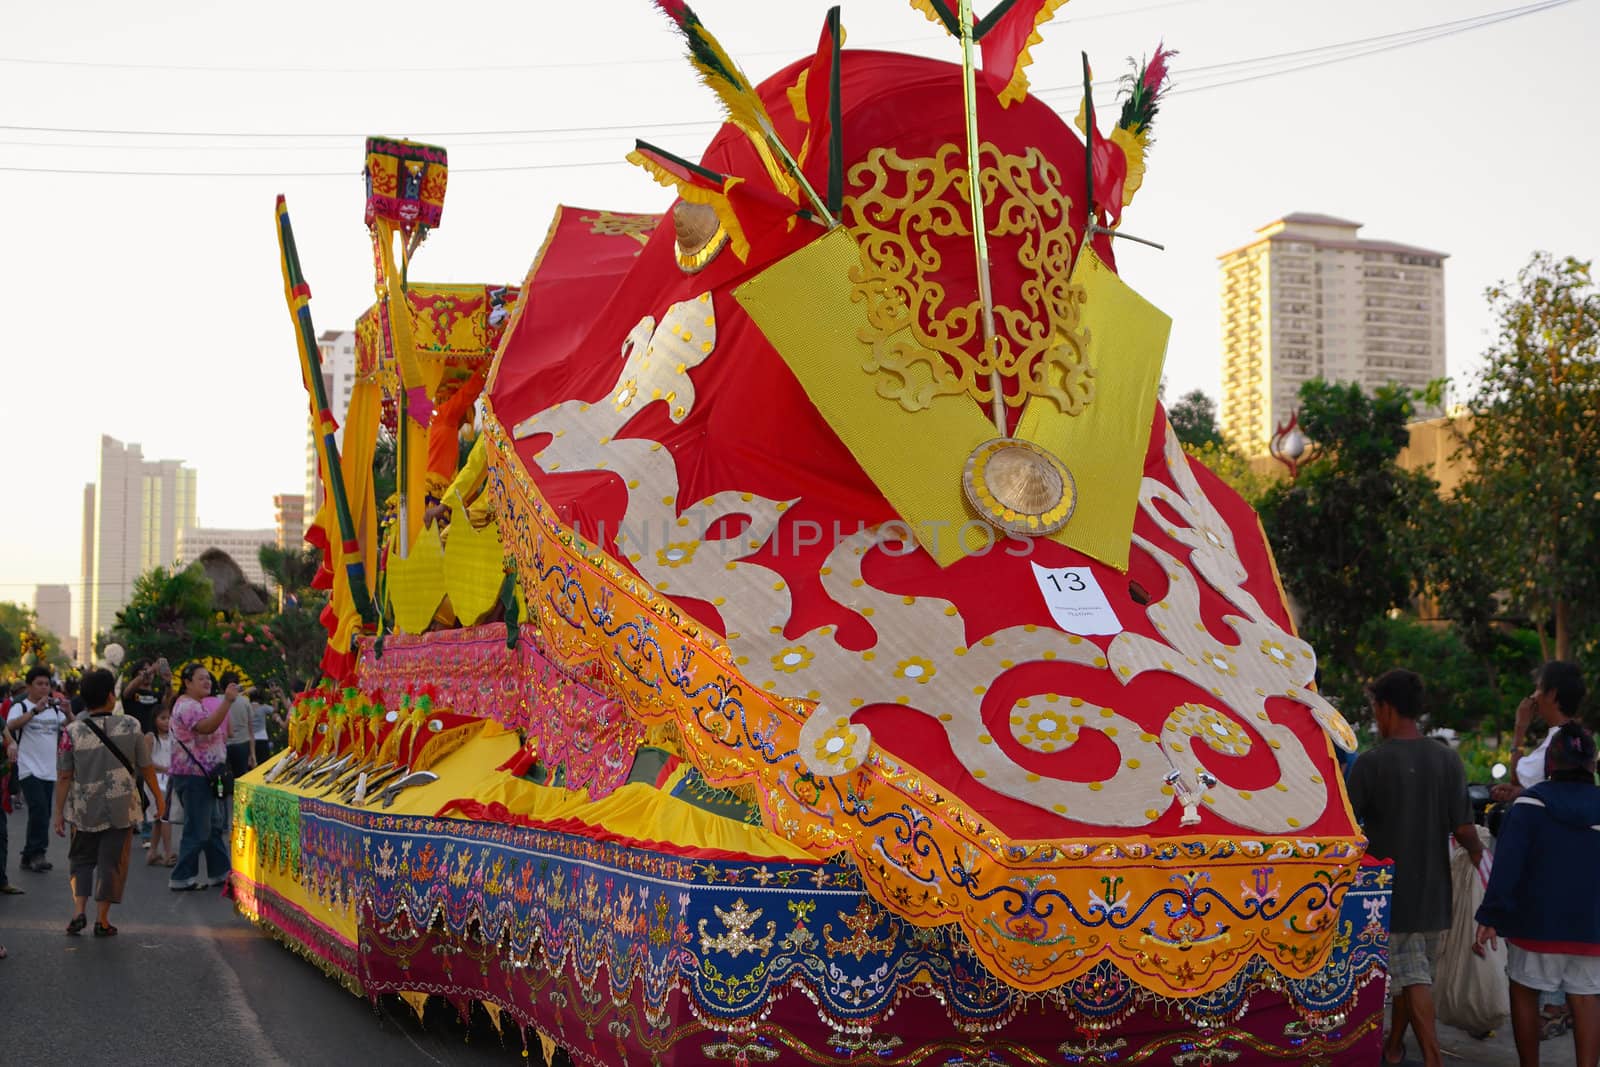 MANILA, PHILIPPINES - APR. 14: giant shoe on parade during Aliwan Fiesta, which is the biggest annual national festival competition on April 14, 2012 in Manila Philippines.